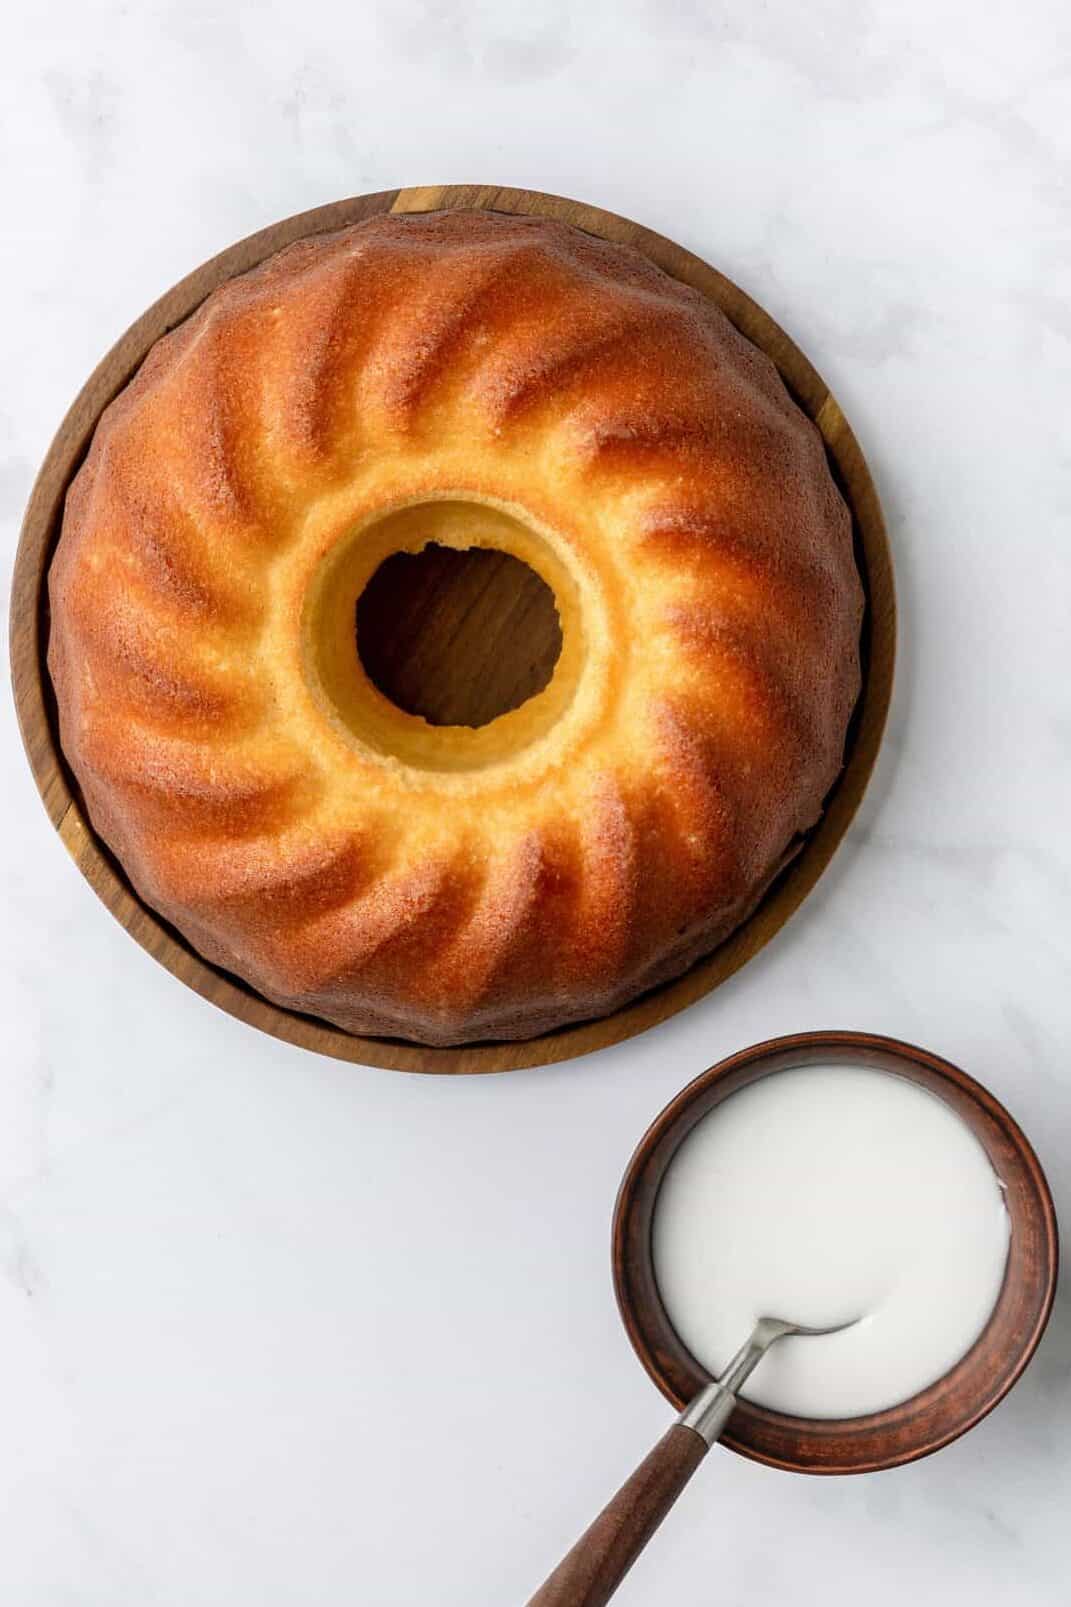 perfectly baked bundt cake sitting on a wooden platter.